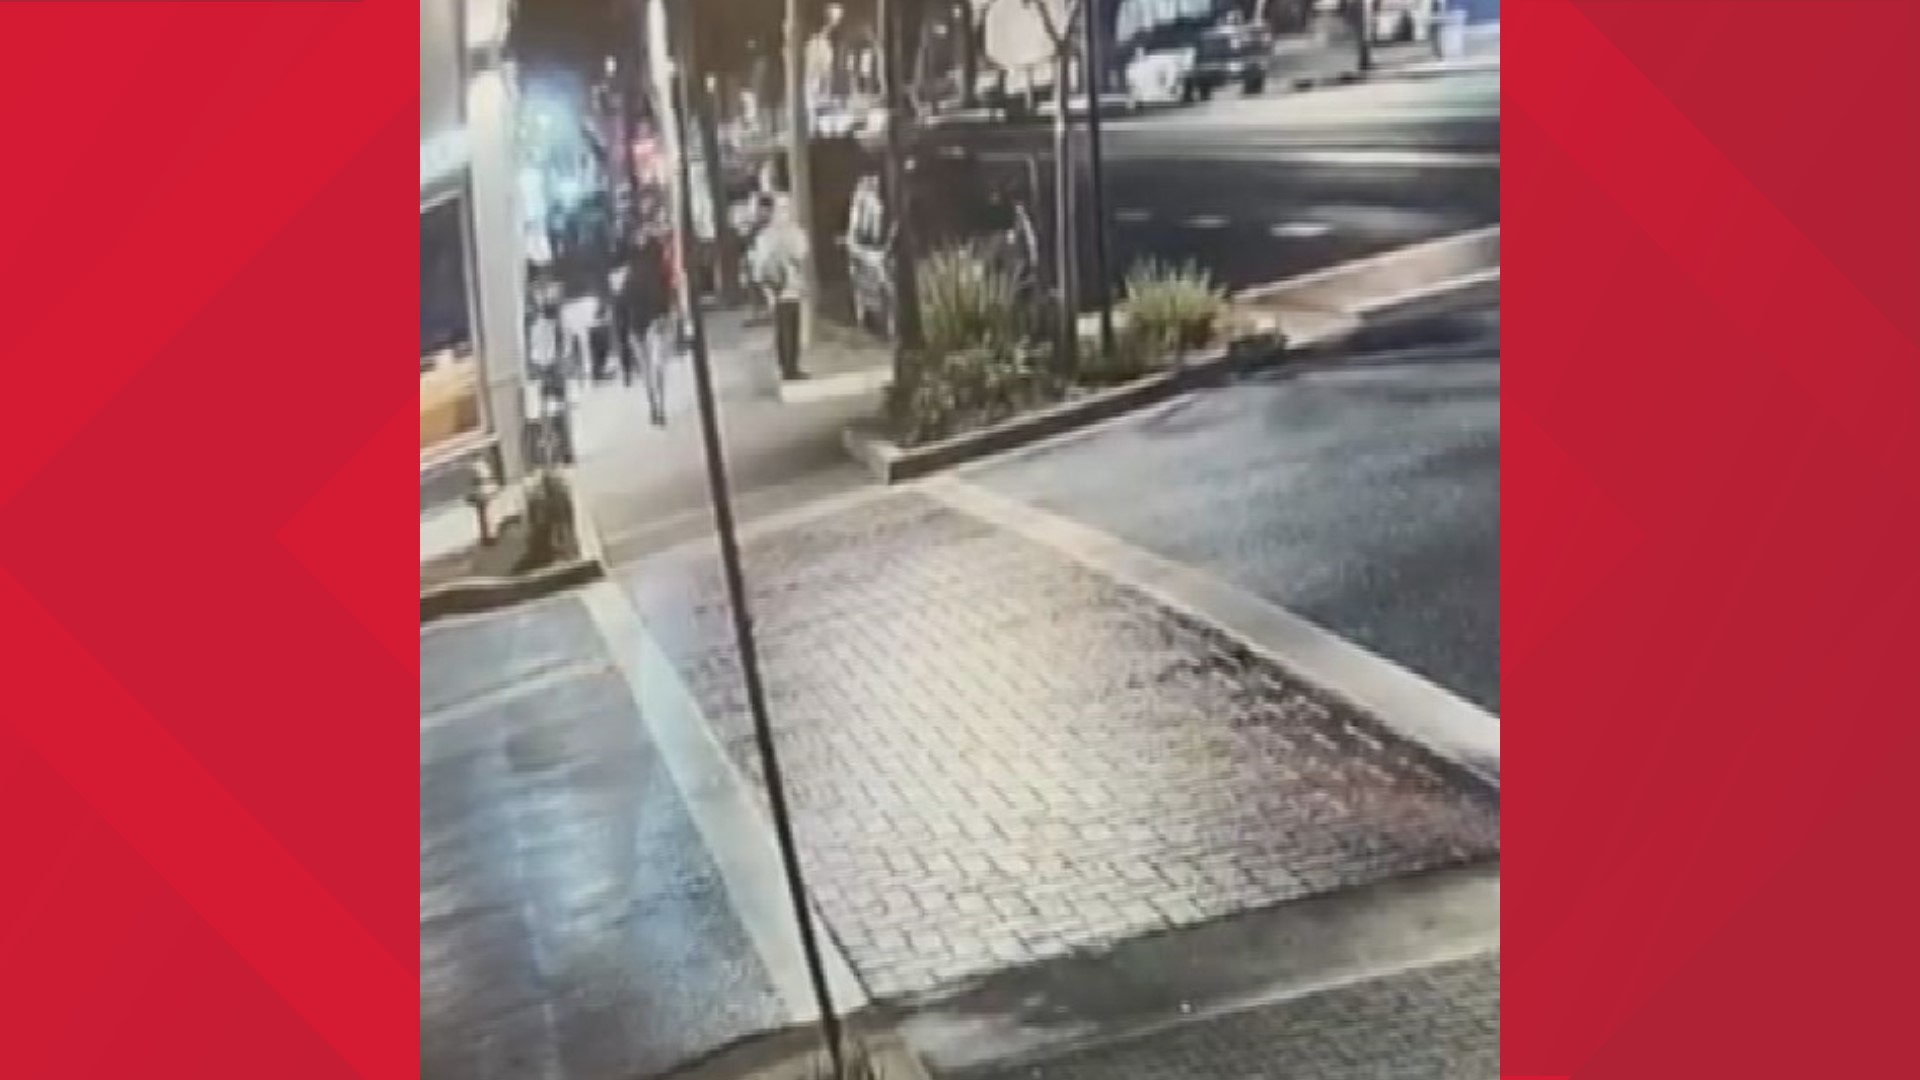 The Davis Police Department needs help identifying six suspects accused of brutally attacking two people in the city’s downtown.